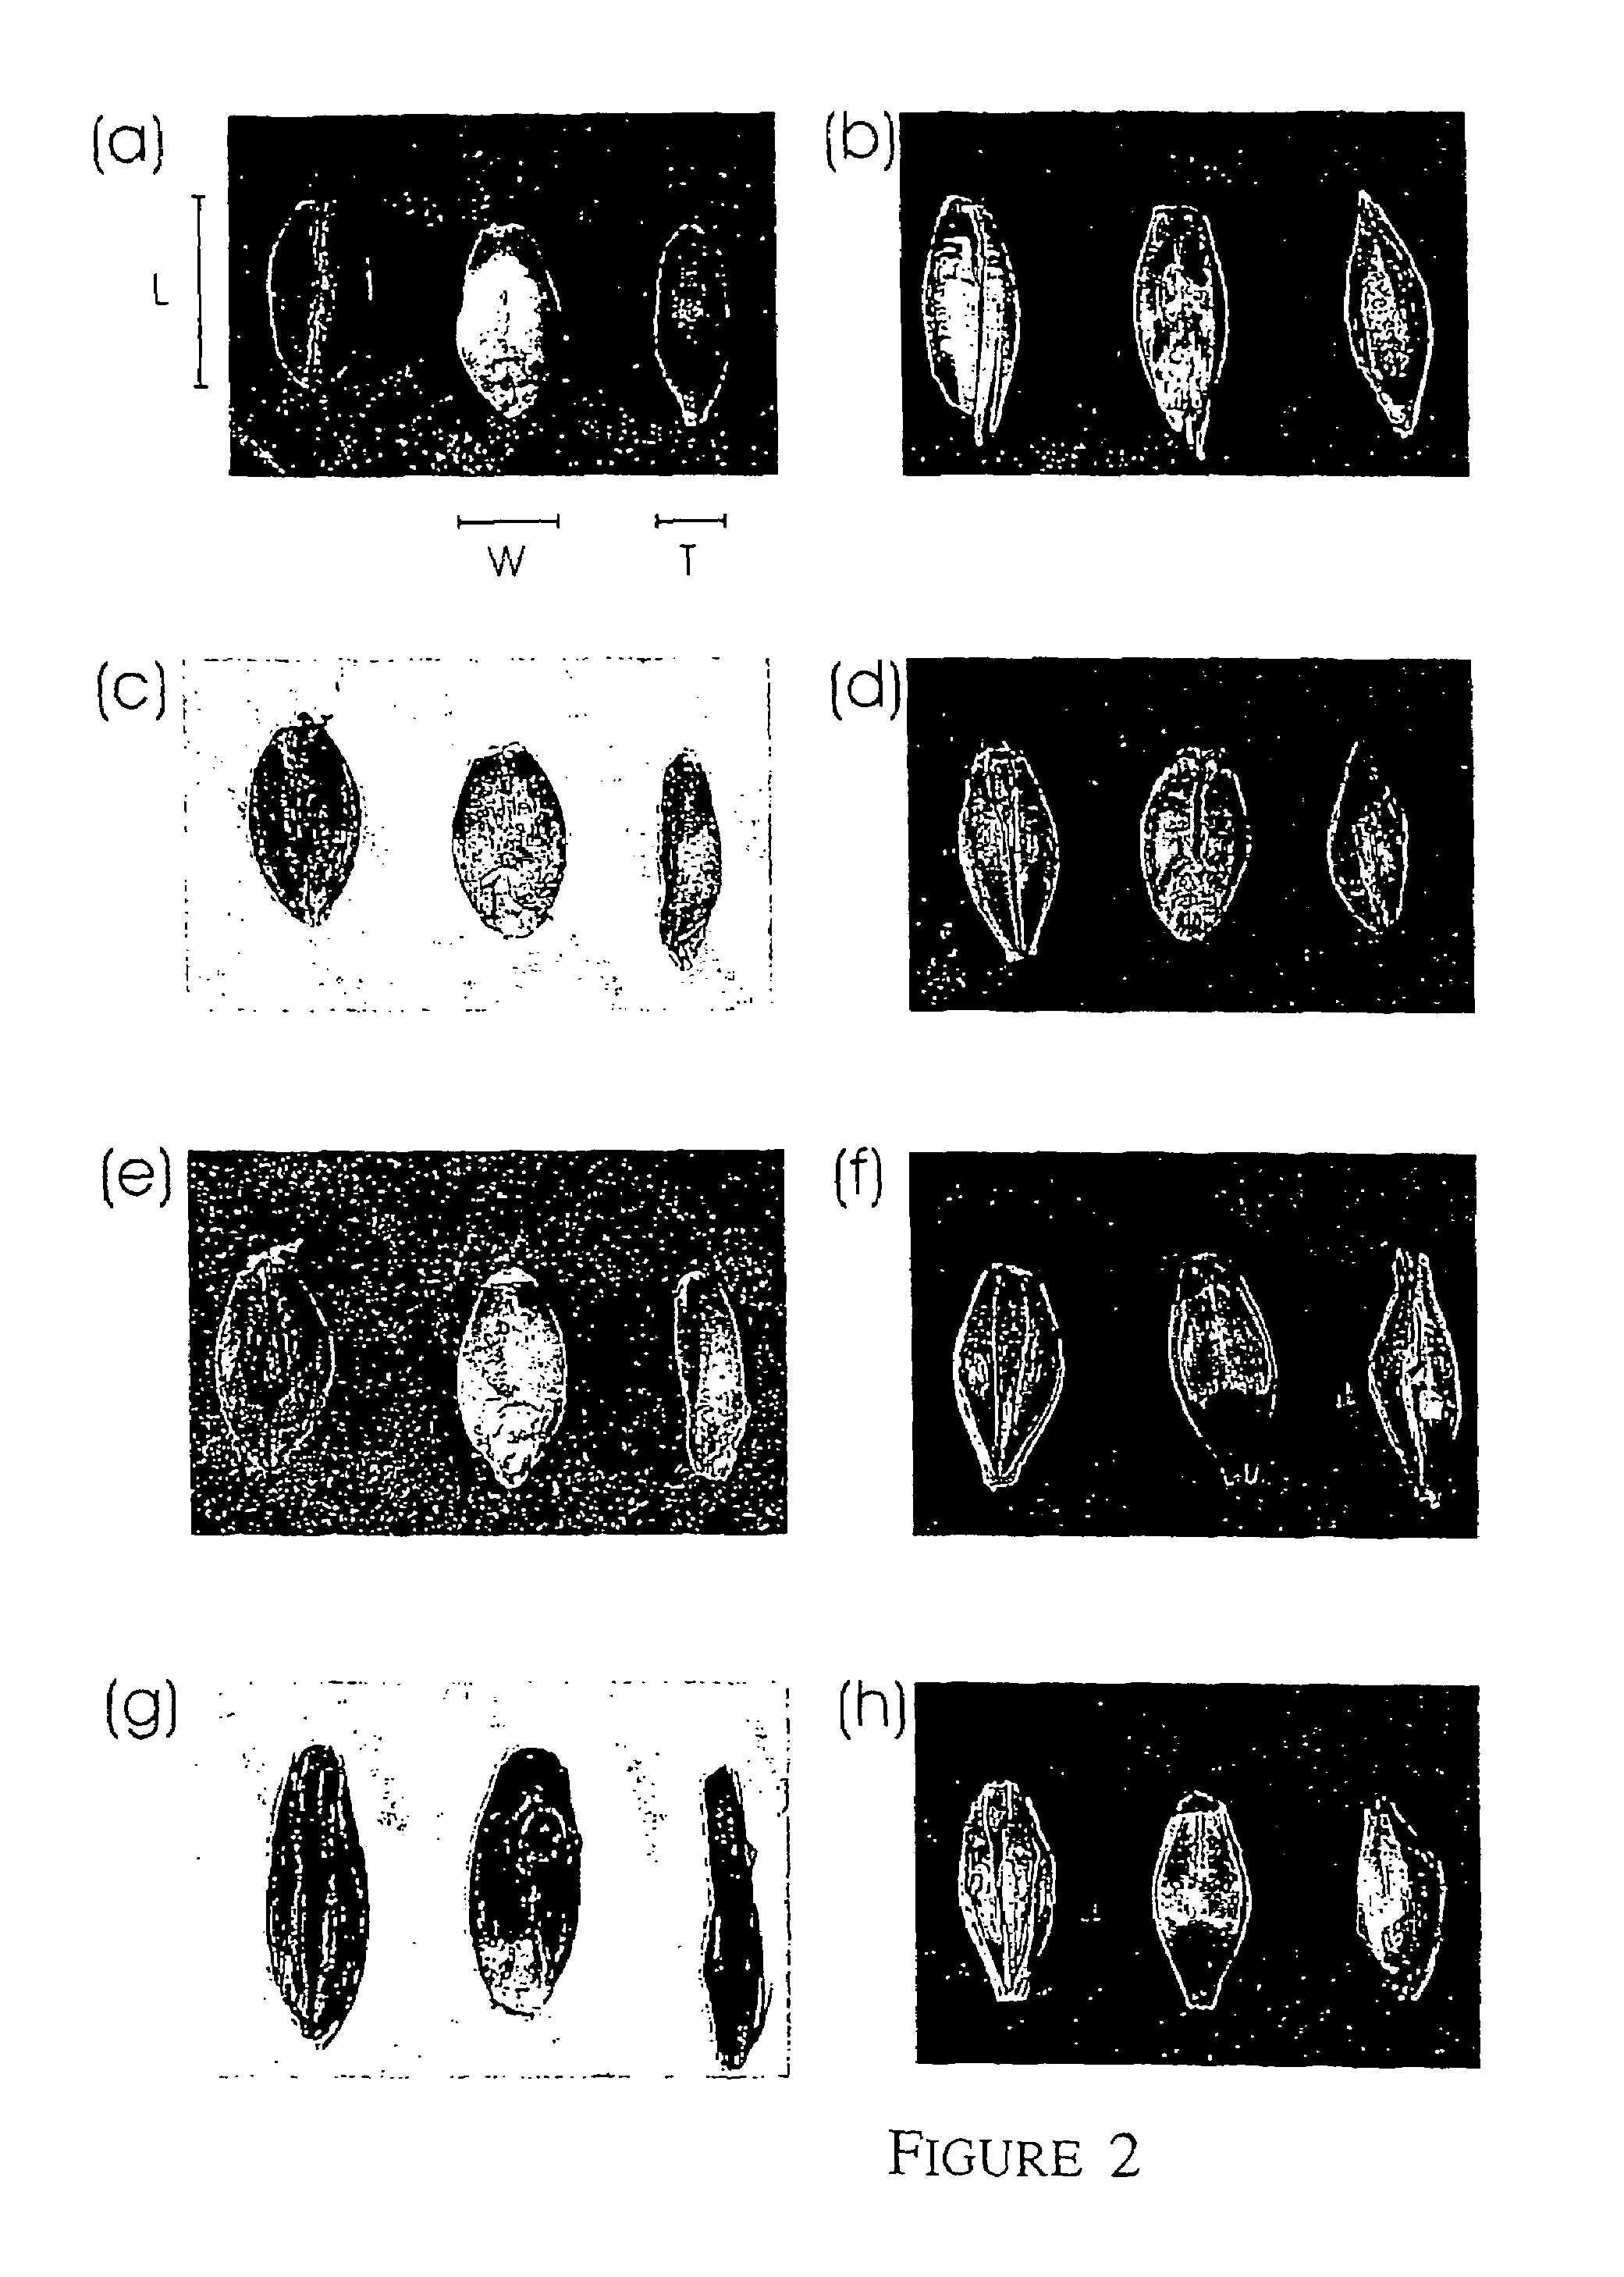 Barley with reduced SSII activity and starch containing products with a reduced amylopectin content